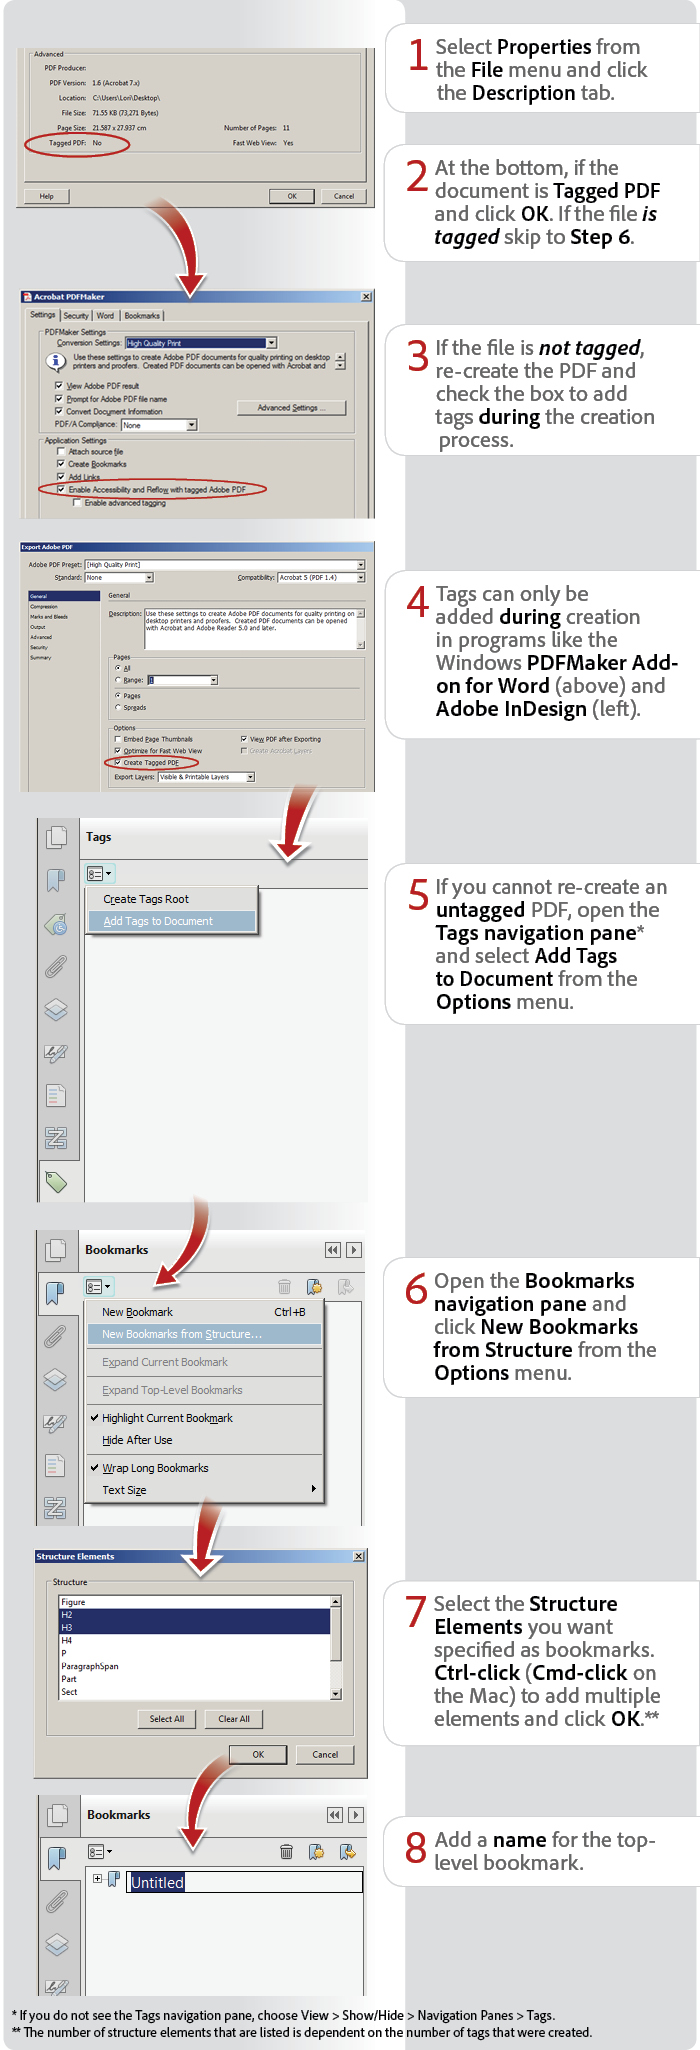 How to create structured bookmarks using Acrobat XI